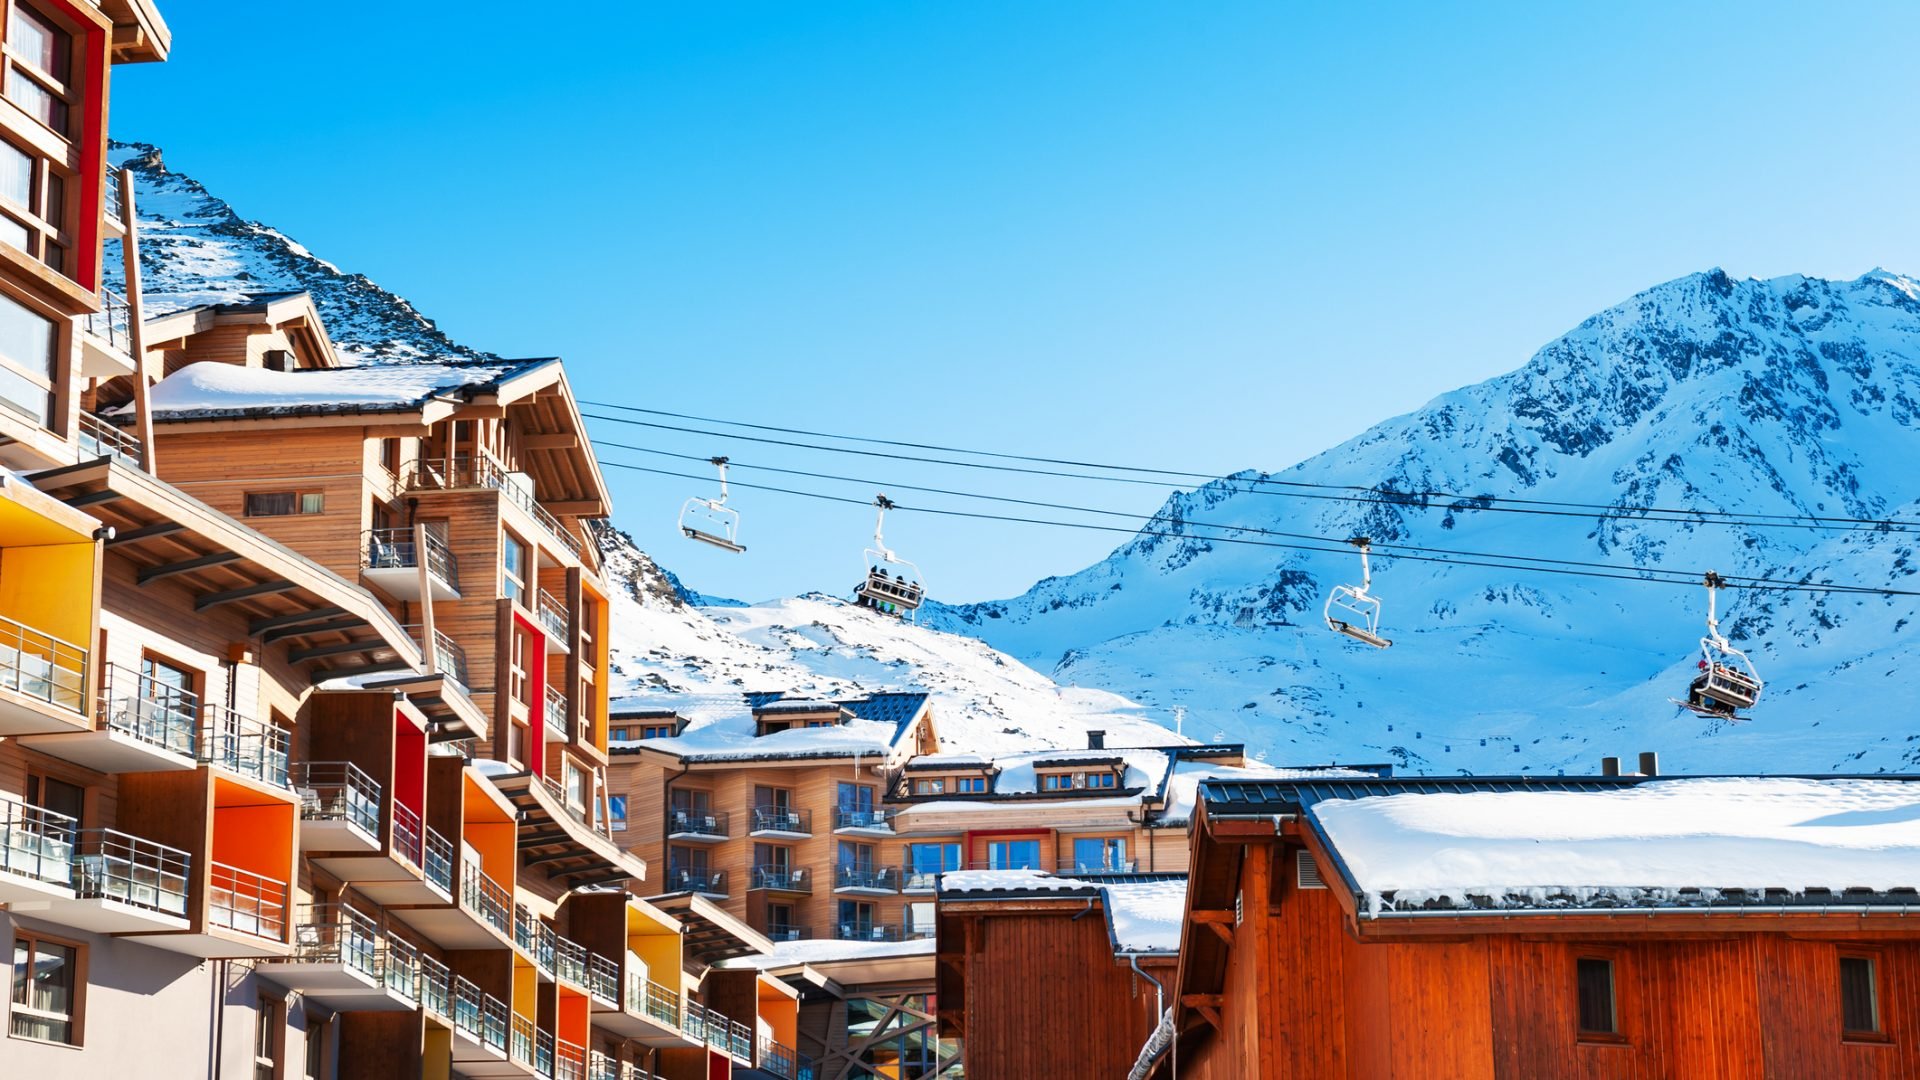 The 10 Most Affordable Ski Resorts In The U.S. – Forbes Advisor